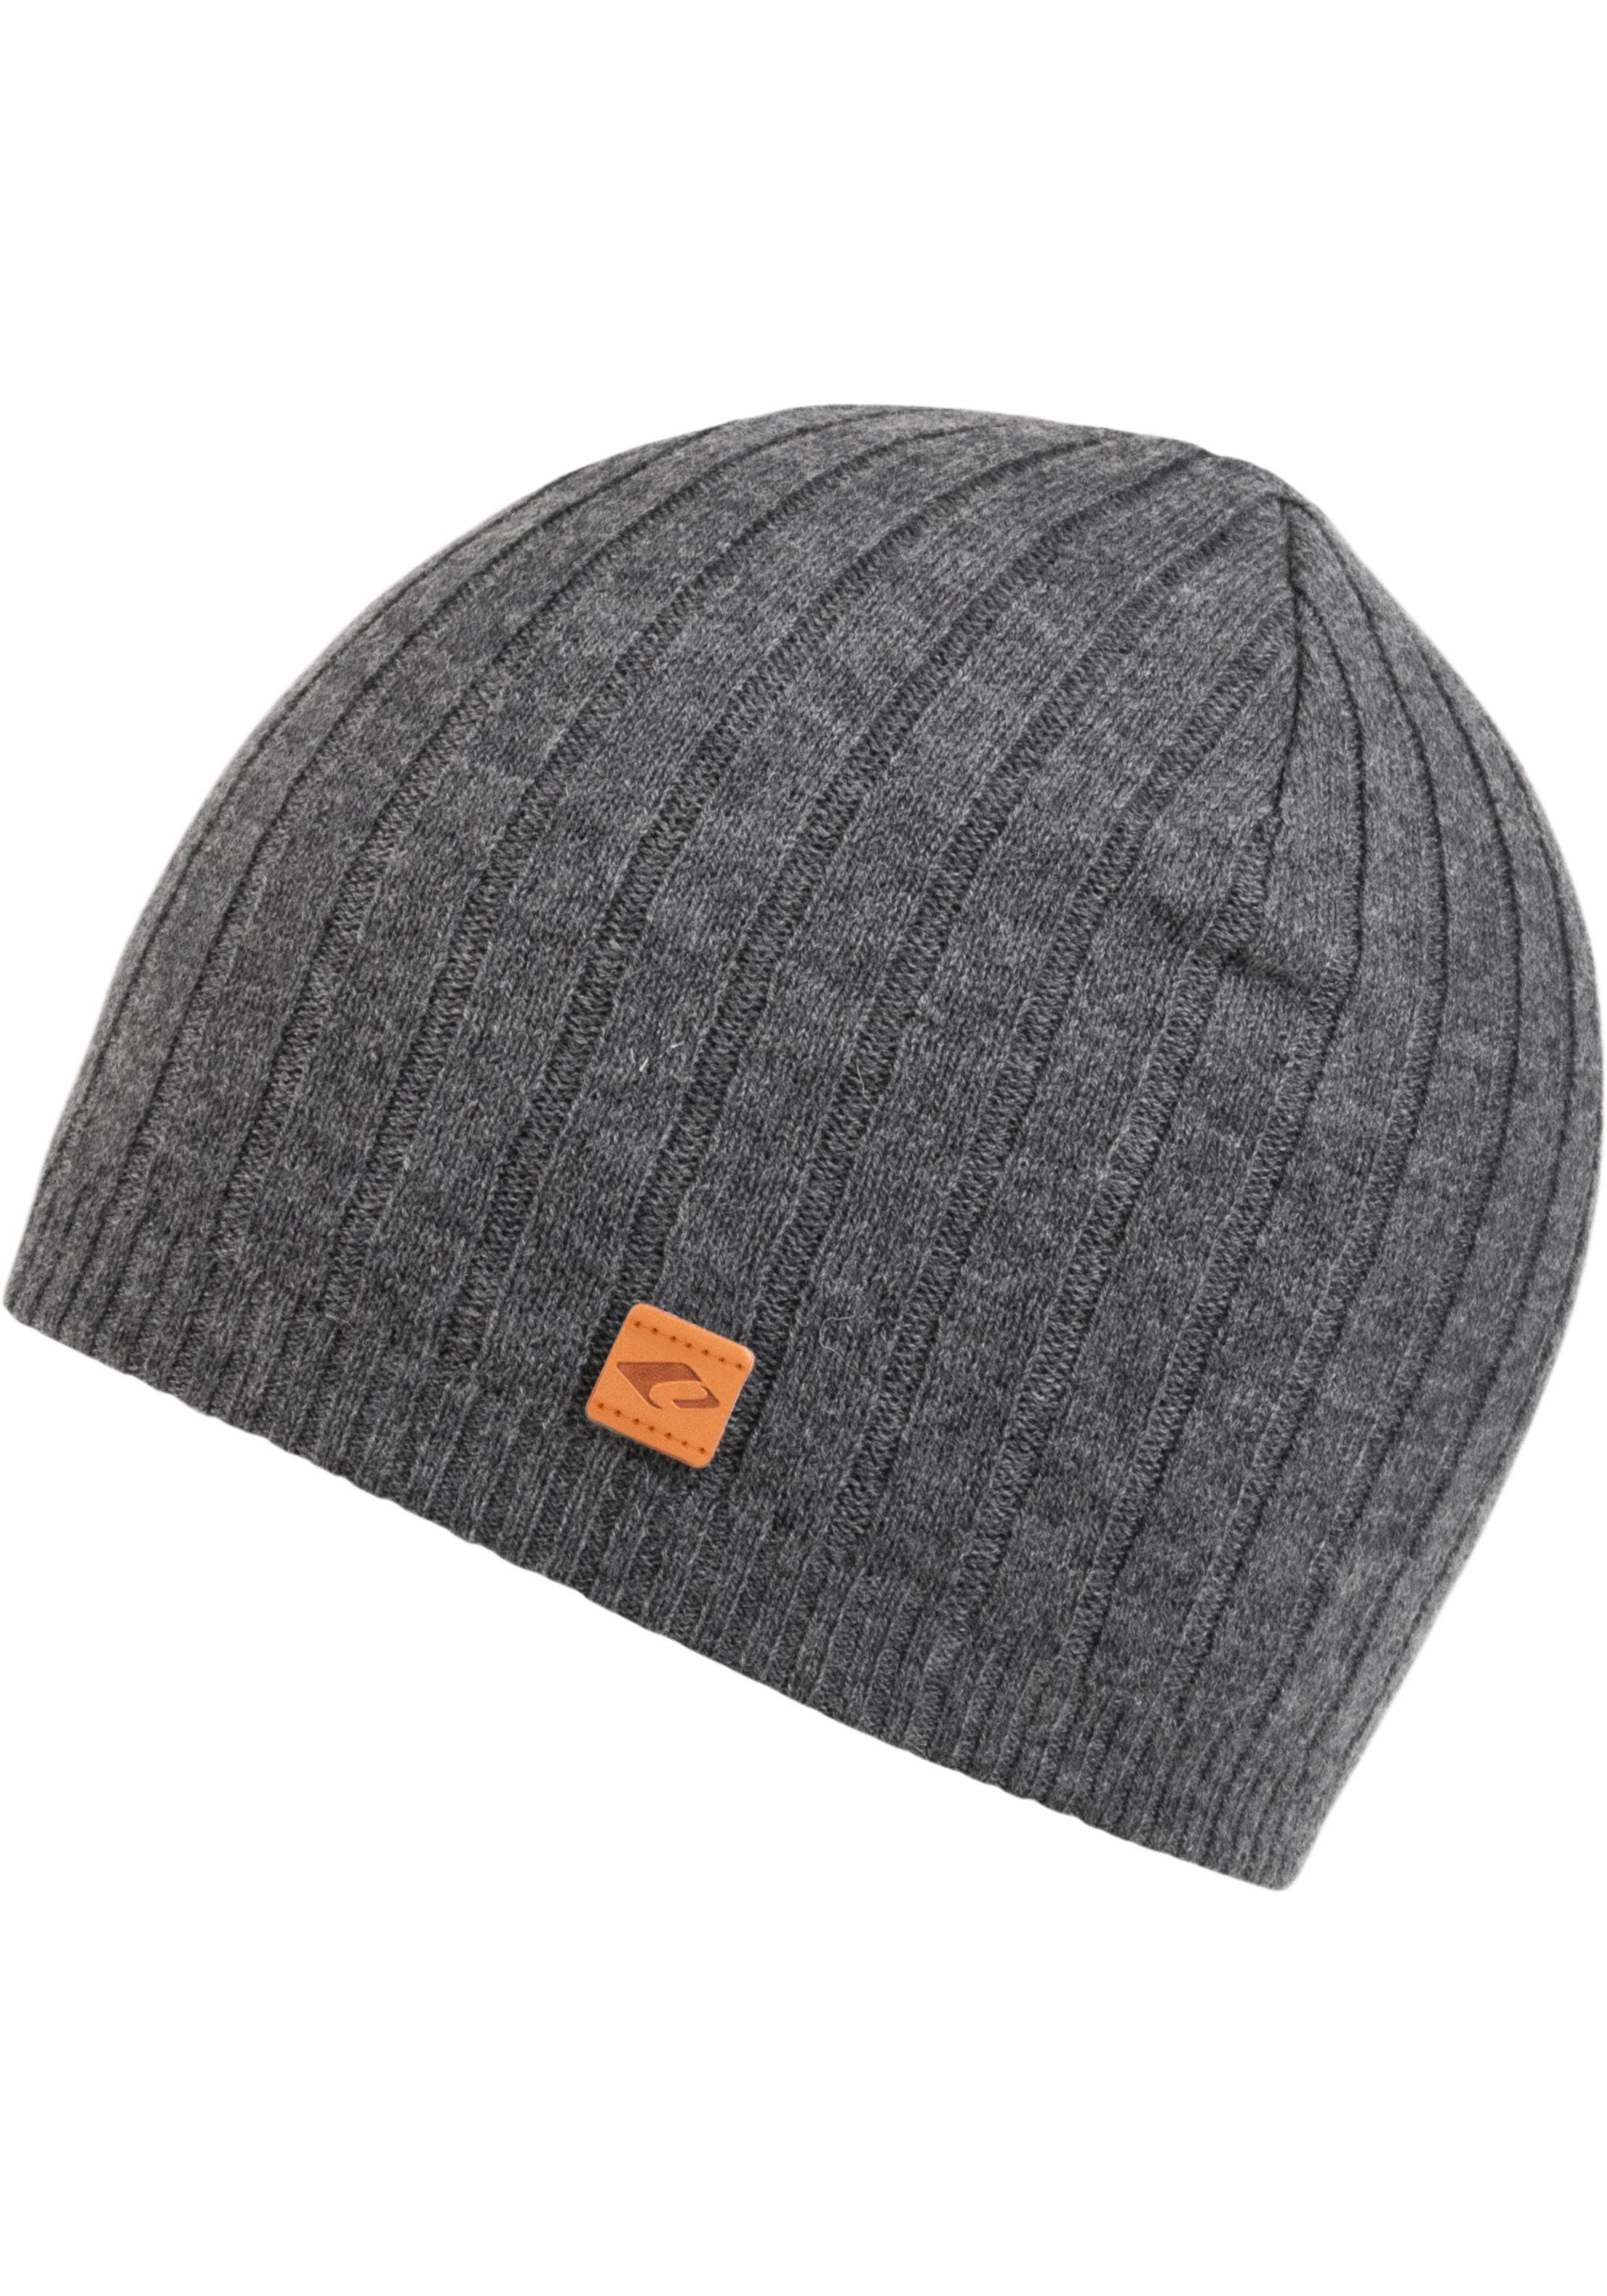 chillouts Beanie Alfred Hat angenehm melange grey warm Doppellagig